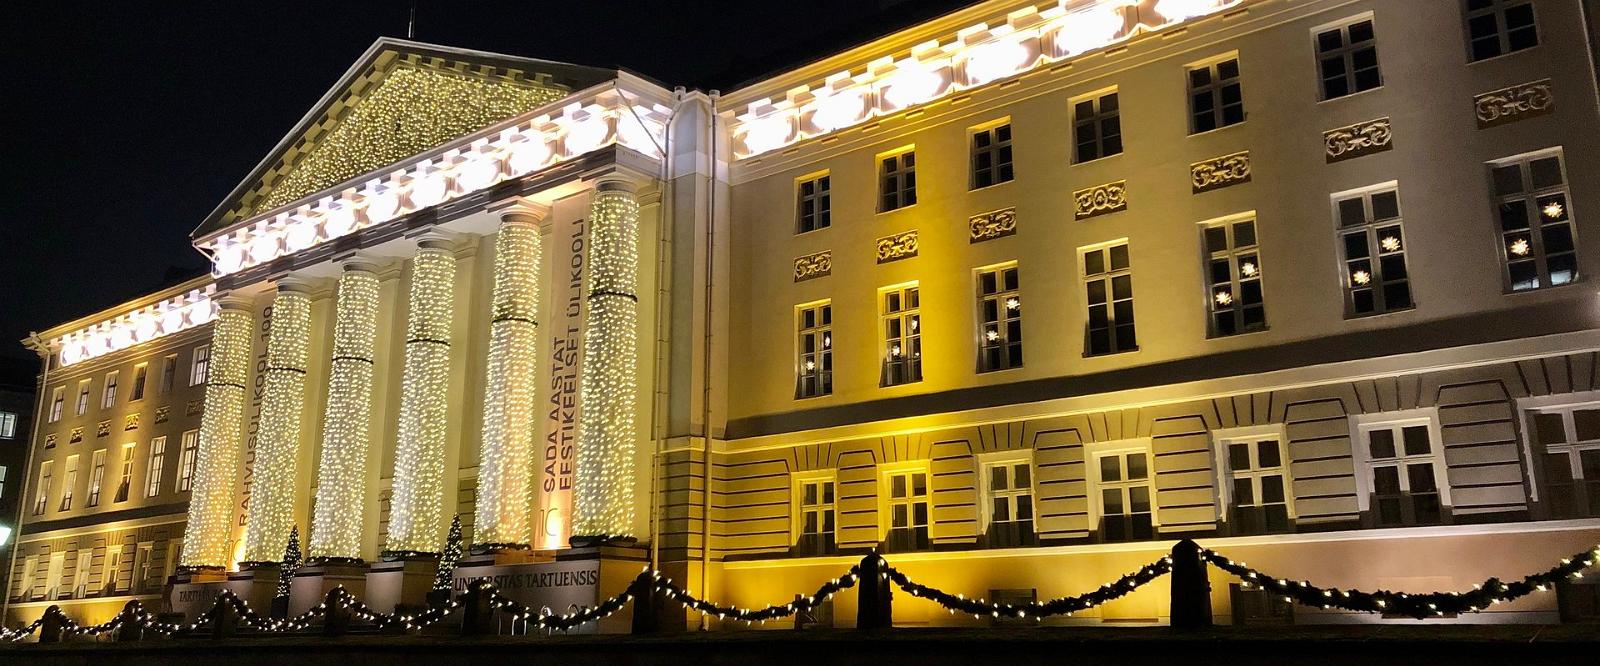 Virtual tour of the city of Tartu: the main building of the University of Tartu in Christmas lights